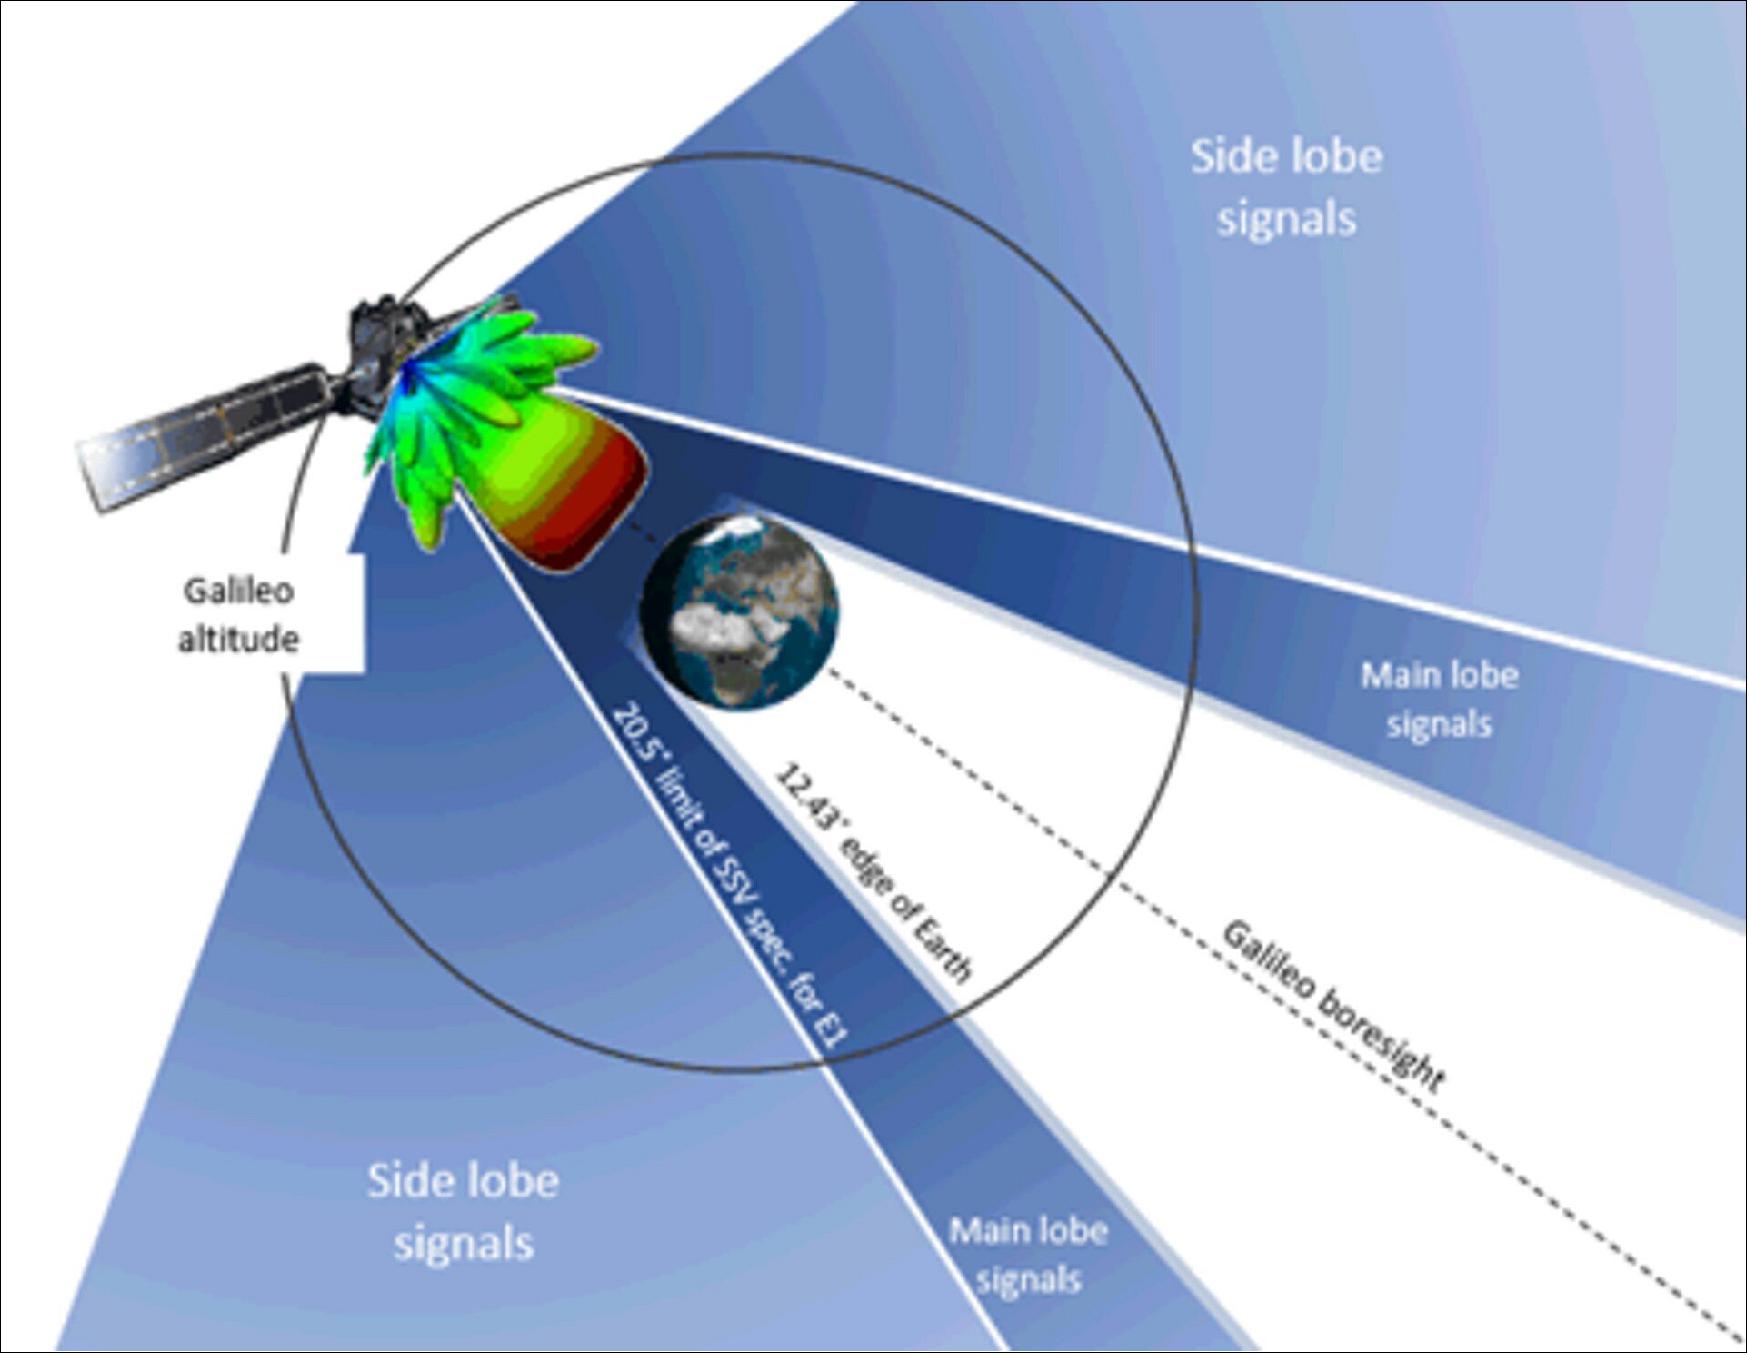 Figure 8: Galileo 'side lobe' signals. Navigation satellites – such as Europe's Galileo, the US GPS, Russia's Glonass or their Japanese, Chinese and Indian counterparts – aim their antennas directly at Earth. Any satellite orbiting above these constellation can only hope to detect signals from over Earth's far side, but the majority are blocked by the planet. For a position fix, a satnav receiver requires a minimum of four satellites to be visible, but this is most of the time not possible if based solely on front-facing signals. Instead, satnav receivers in higher orbits can make use of signals emitted sideways from navigation antennas, within what is known as ‘side lobes'. Just like a flashlight, radio antennas shine energy to the side as well as directly forward (image credit: ESA)